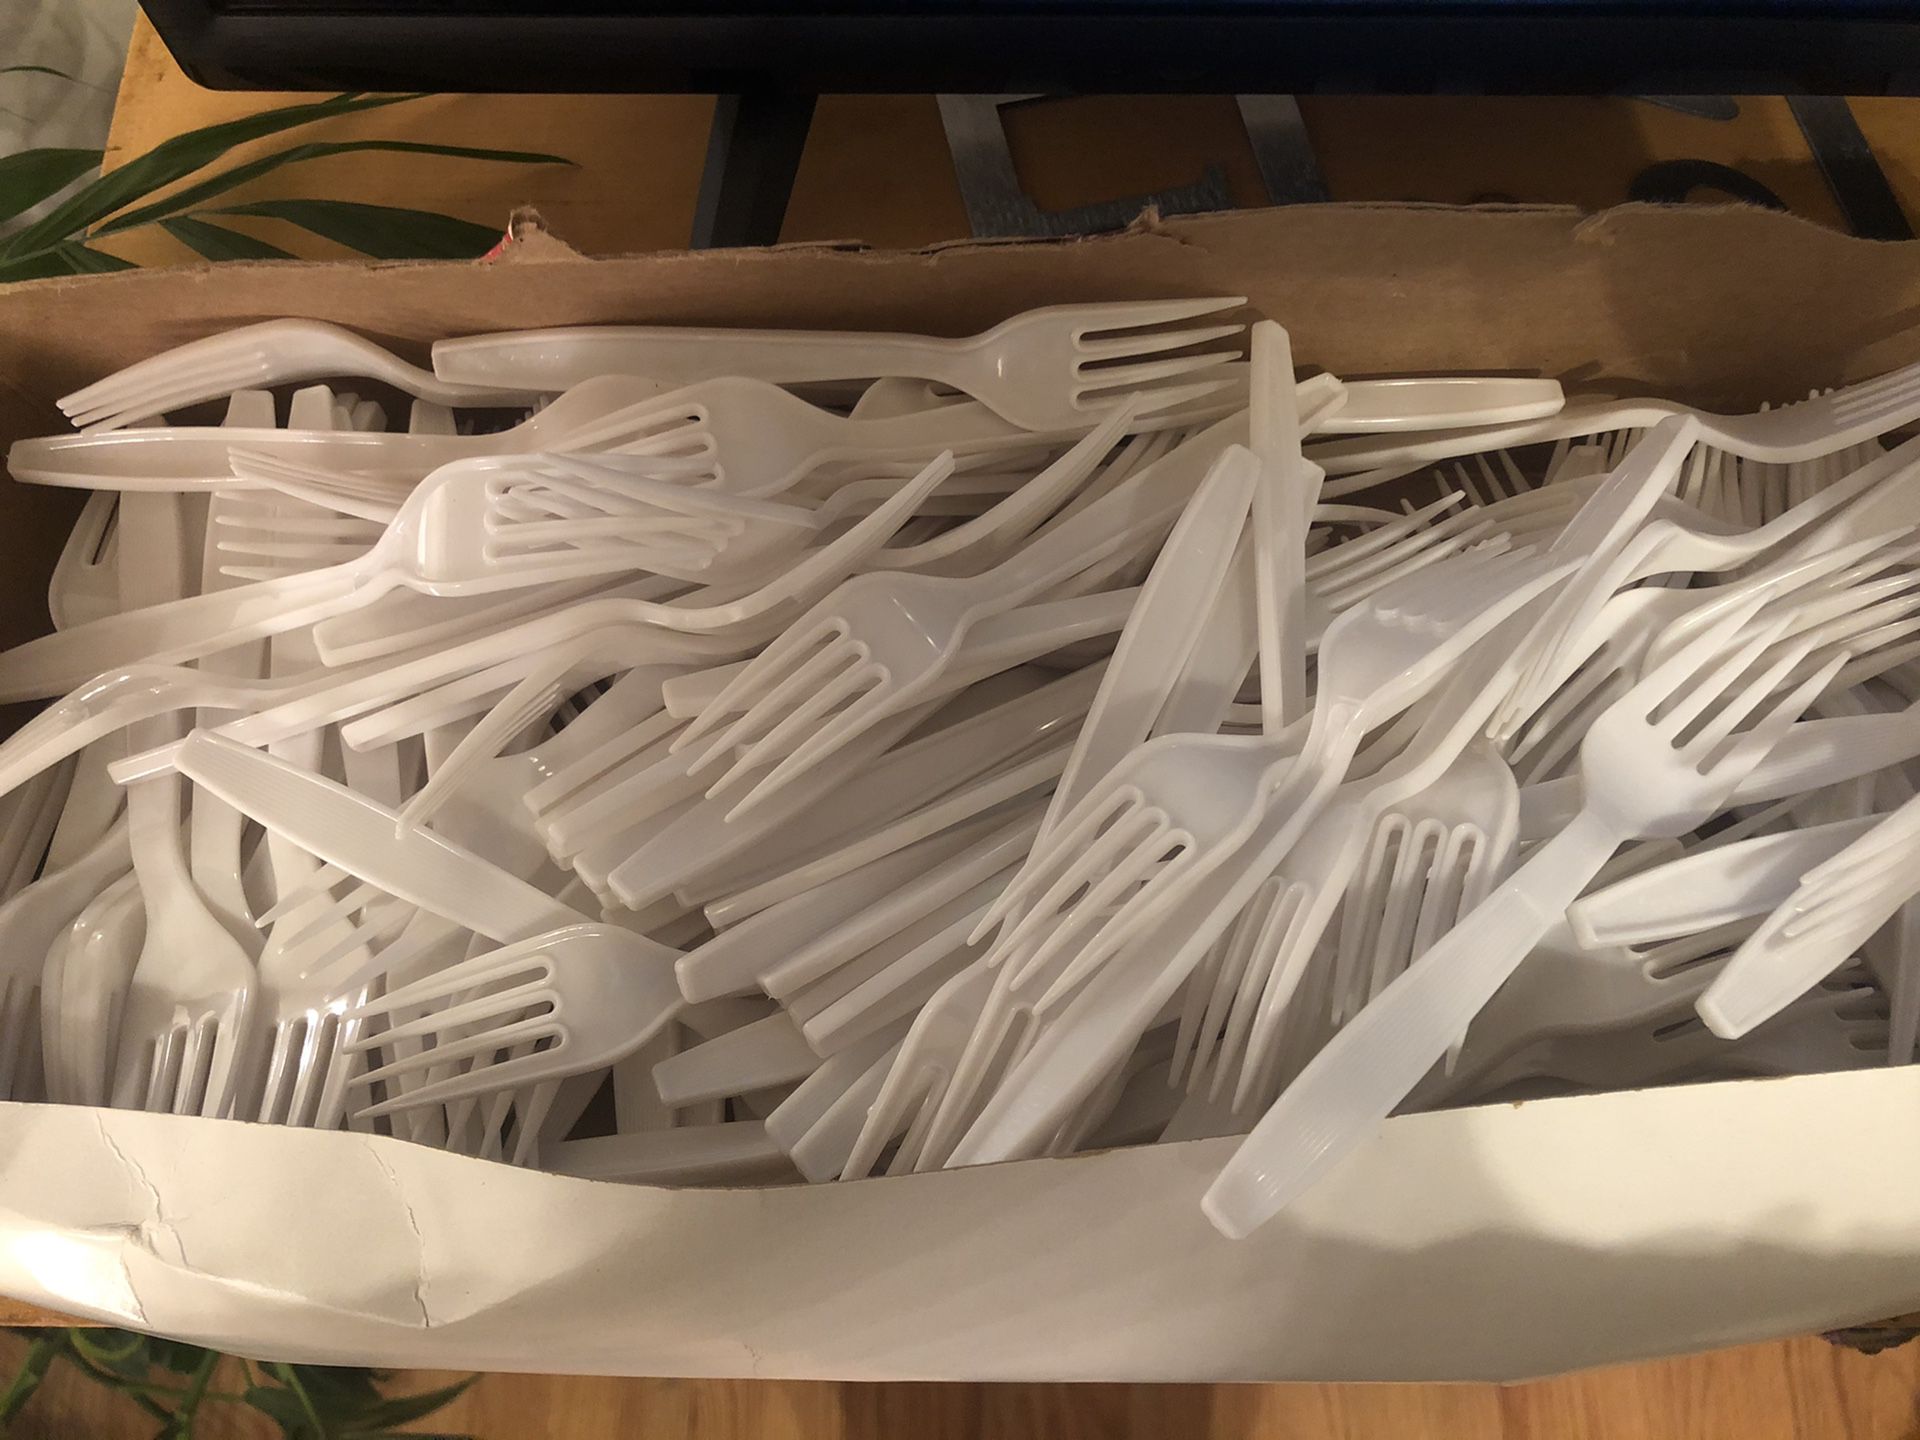 Box of 500 spoons & box of 500 forks